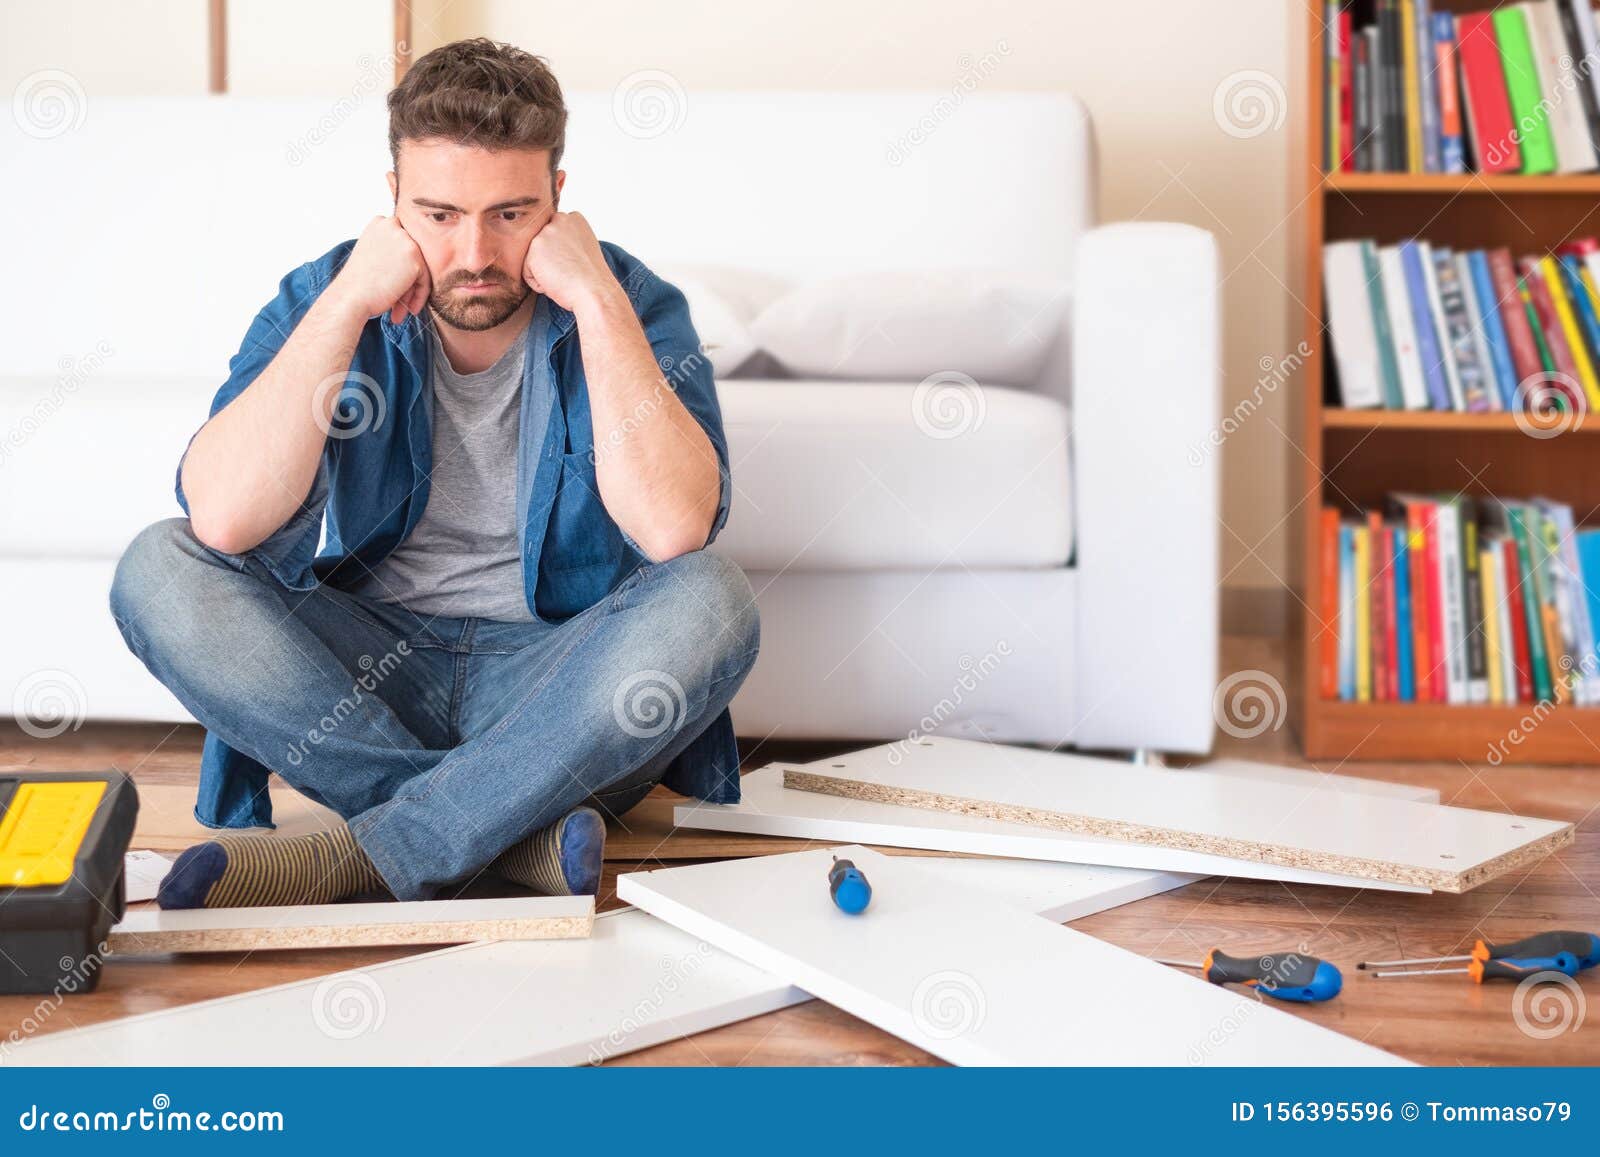 Man Portrait And Do It Yourself Furniture Assembly Stock Photo Image Of Cabinet Manual